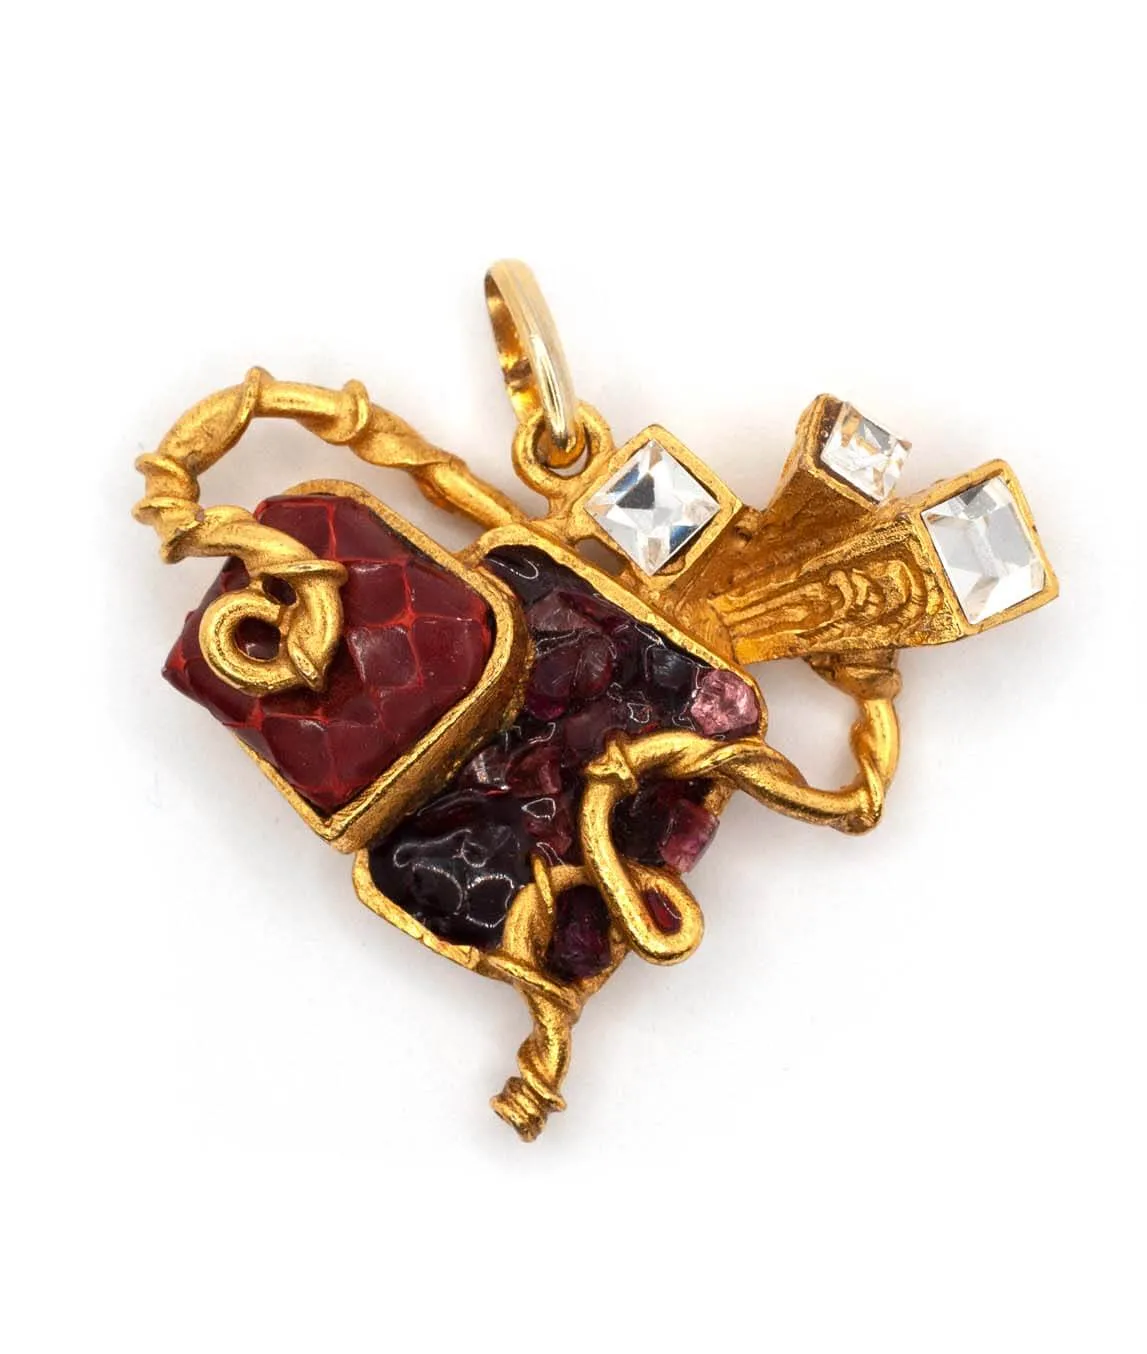 Christian Lacroix heart pendant with snakeskin and crystals